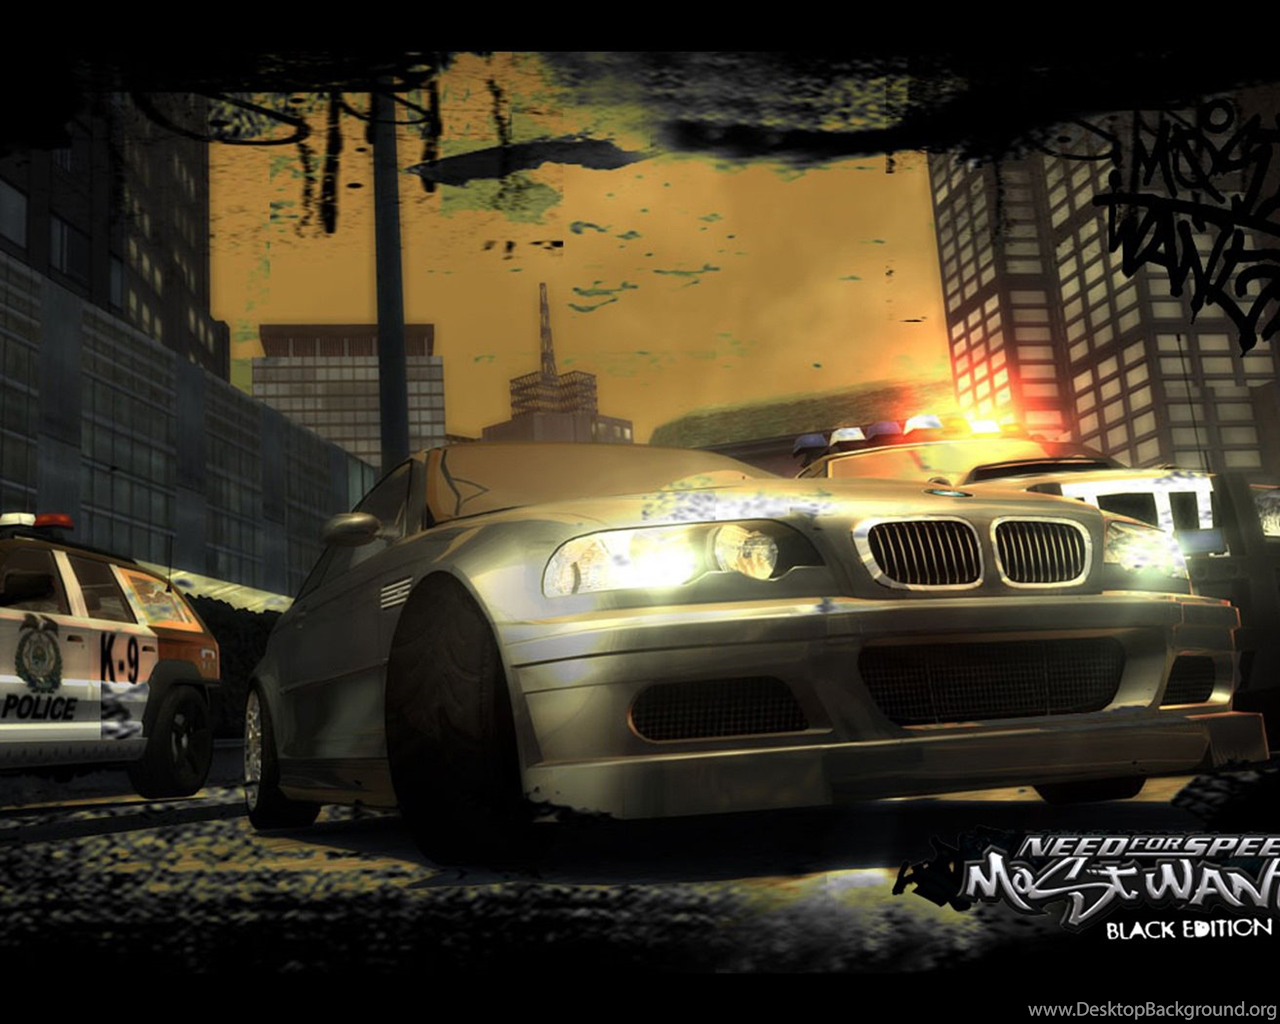 NFS most wanted 2005 мост. NFS most wanted 2005 БМВ. Нфс МВ 2005. NFS MW 2005 BMW. Games need speed most wanted